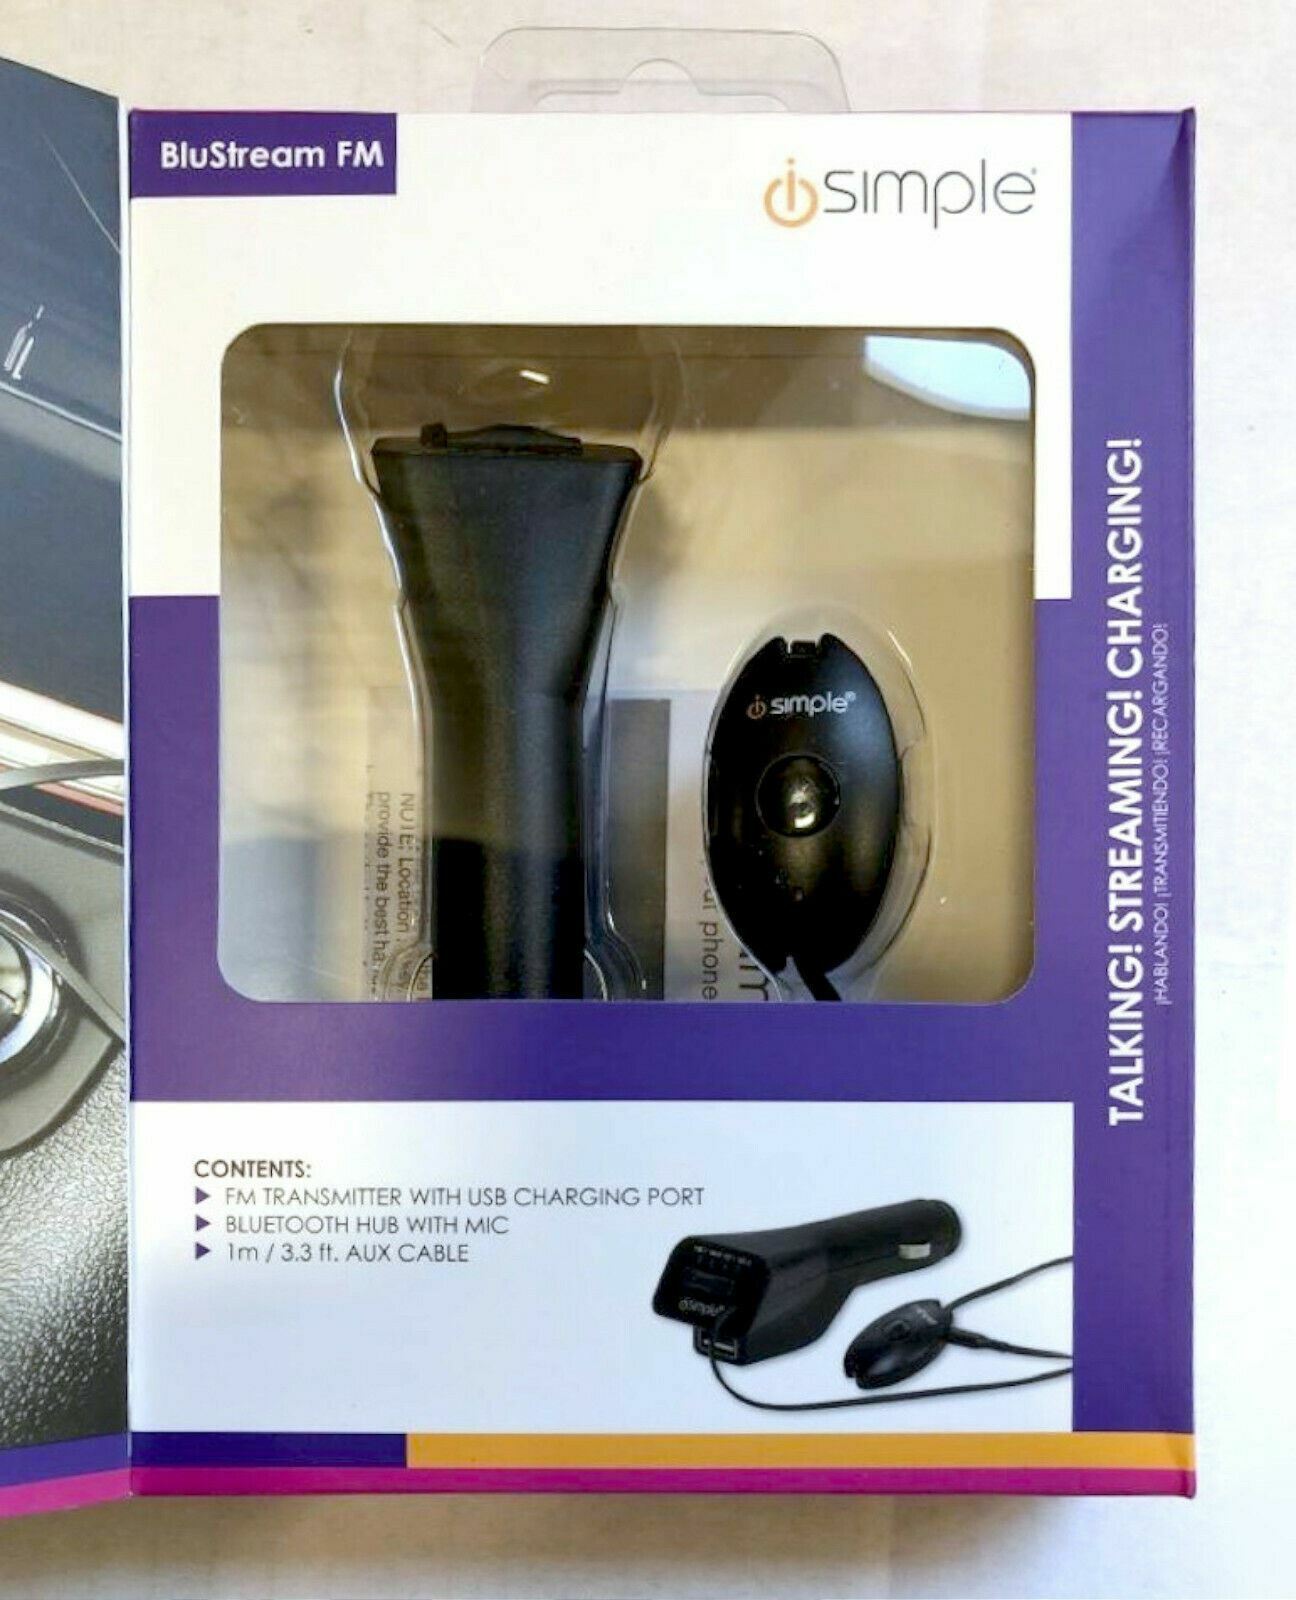 NEW iSimple Bluetooth Car Wireless BluStream and 27 similar items